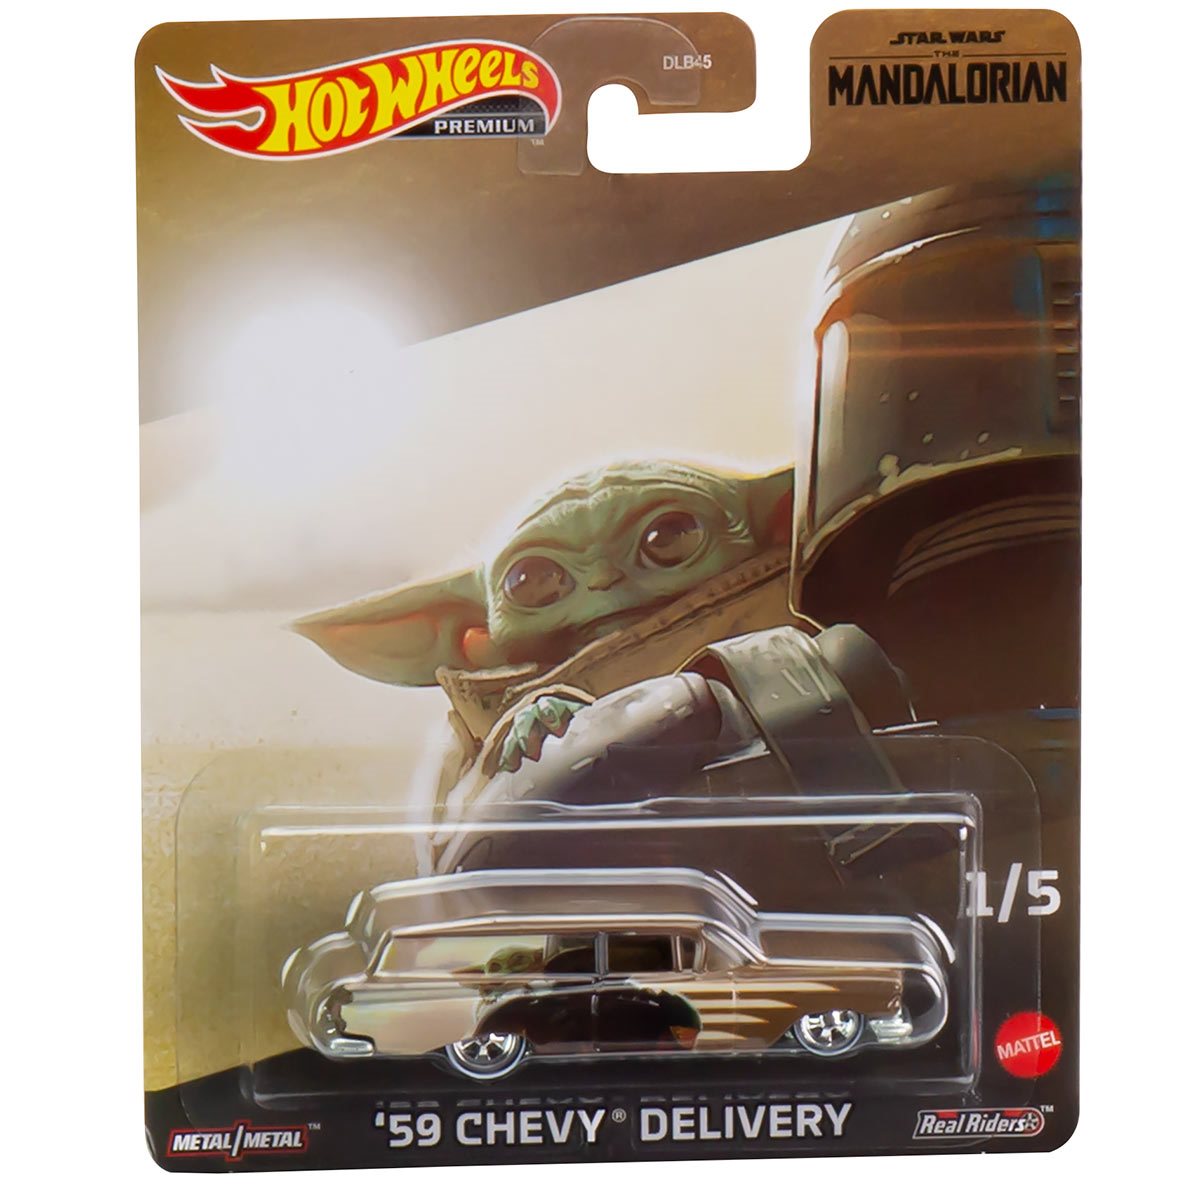 Hot Wheels Pop Culture Character Cars - ‘59 Chevy Delivery (Grogu)